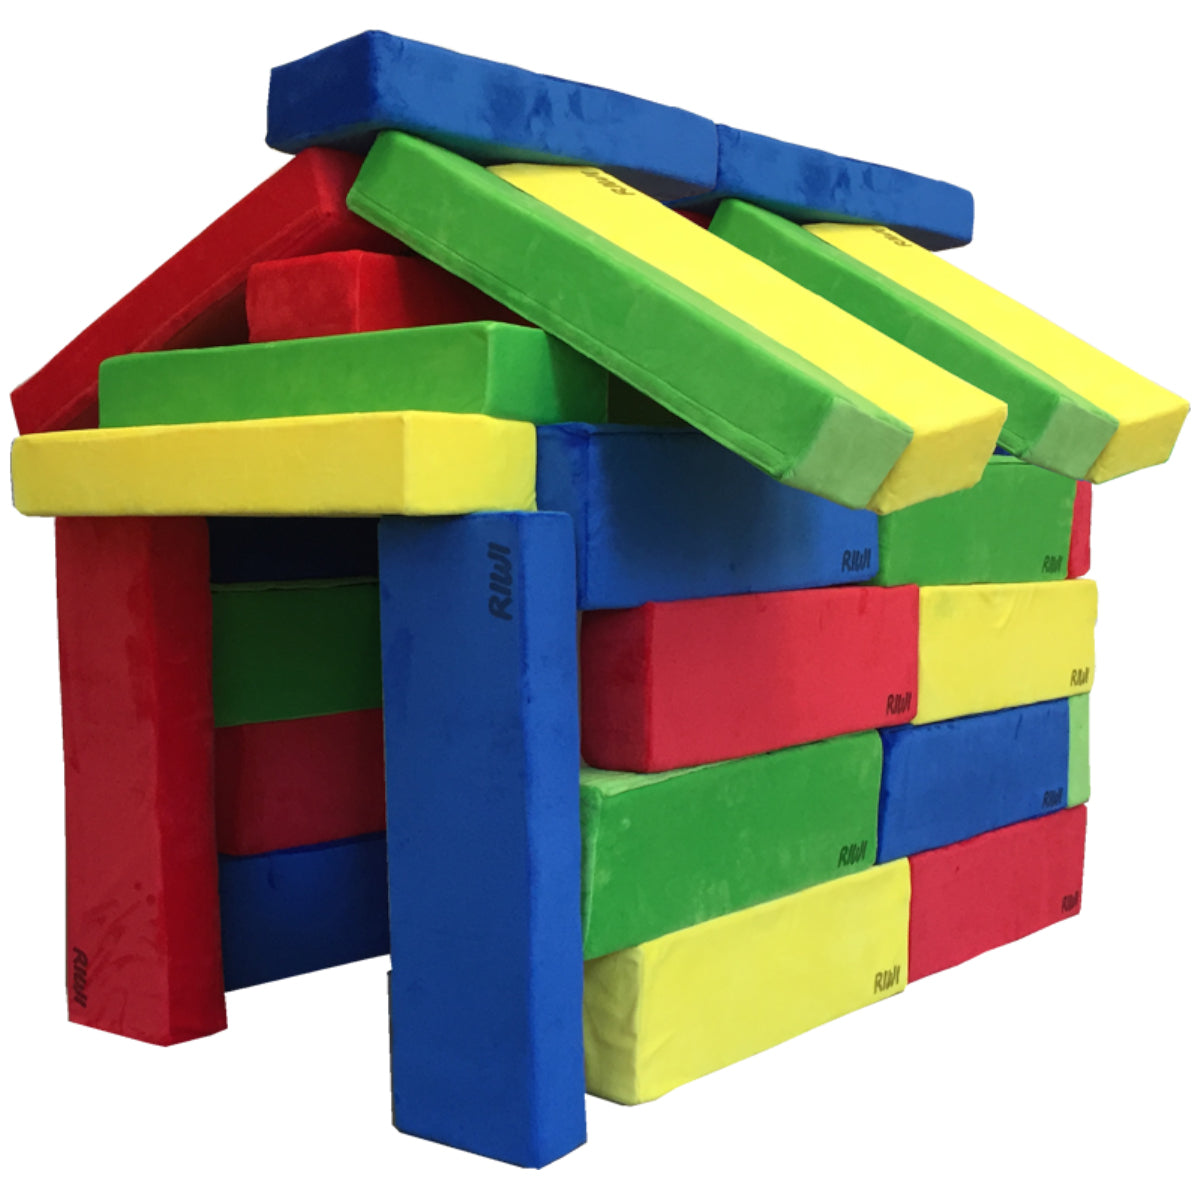 RIWI building blocks with covers house cave soft foam blocks xxl giant bricks for kids creative play